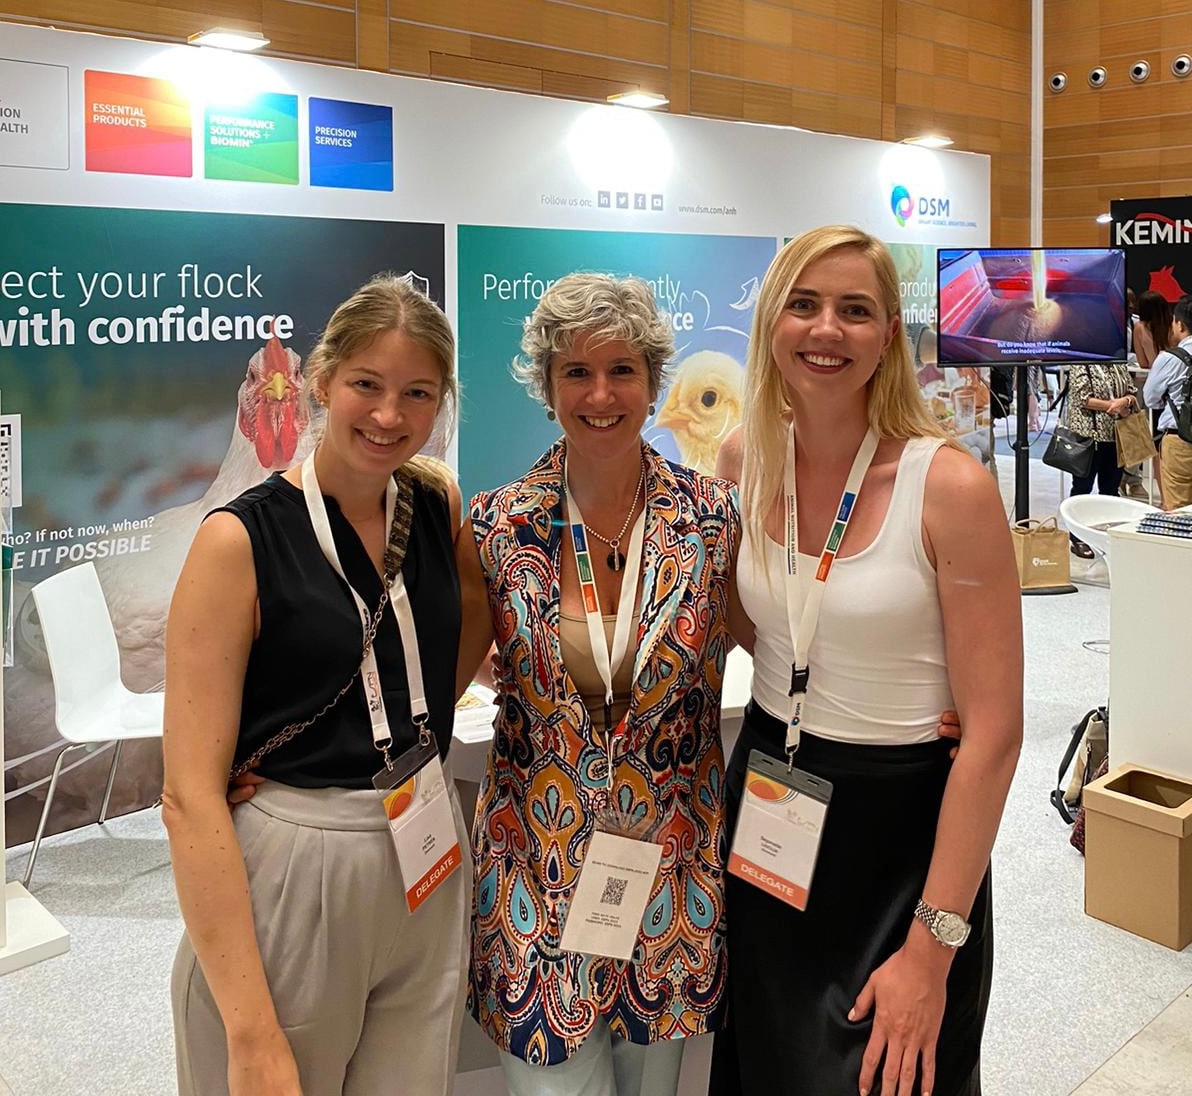 Laura Locatelli Manager Business Development Sustainability, EMEA with Liucija Sejonaite Technical Species Expert, Poultry Meat and Lisa Petren Key Account Manager, Nordics, DSM Animal Nutrition and Health